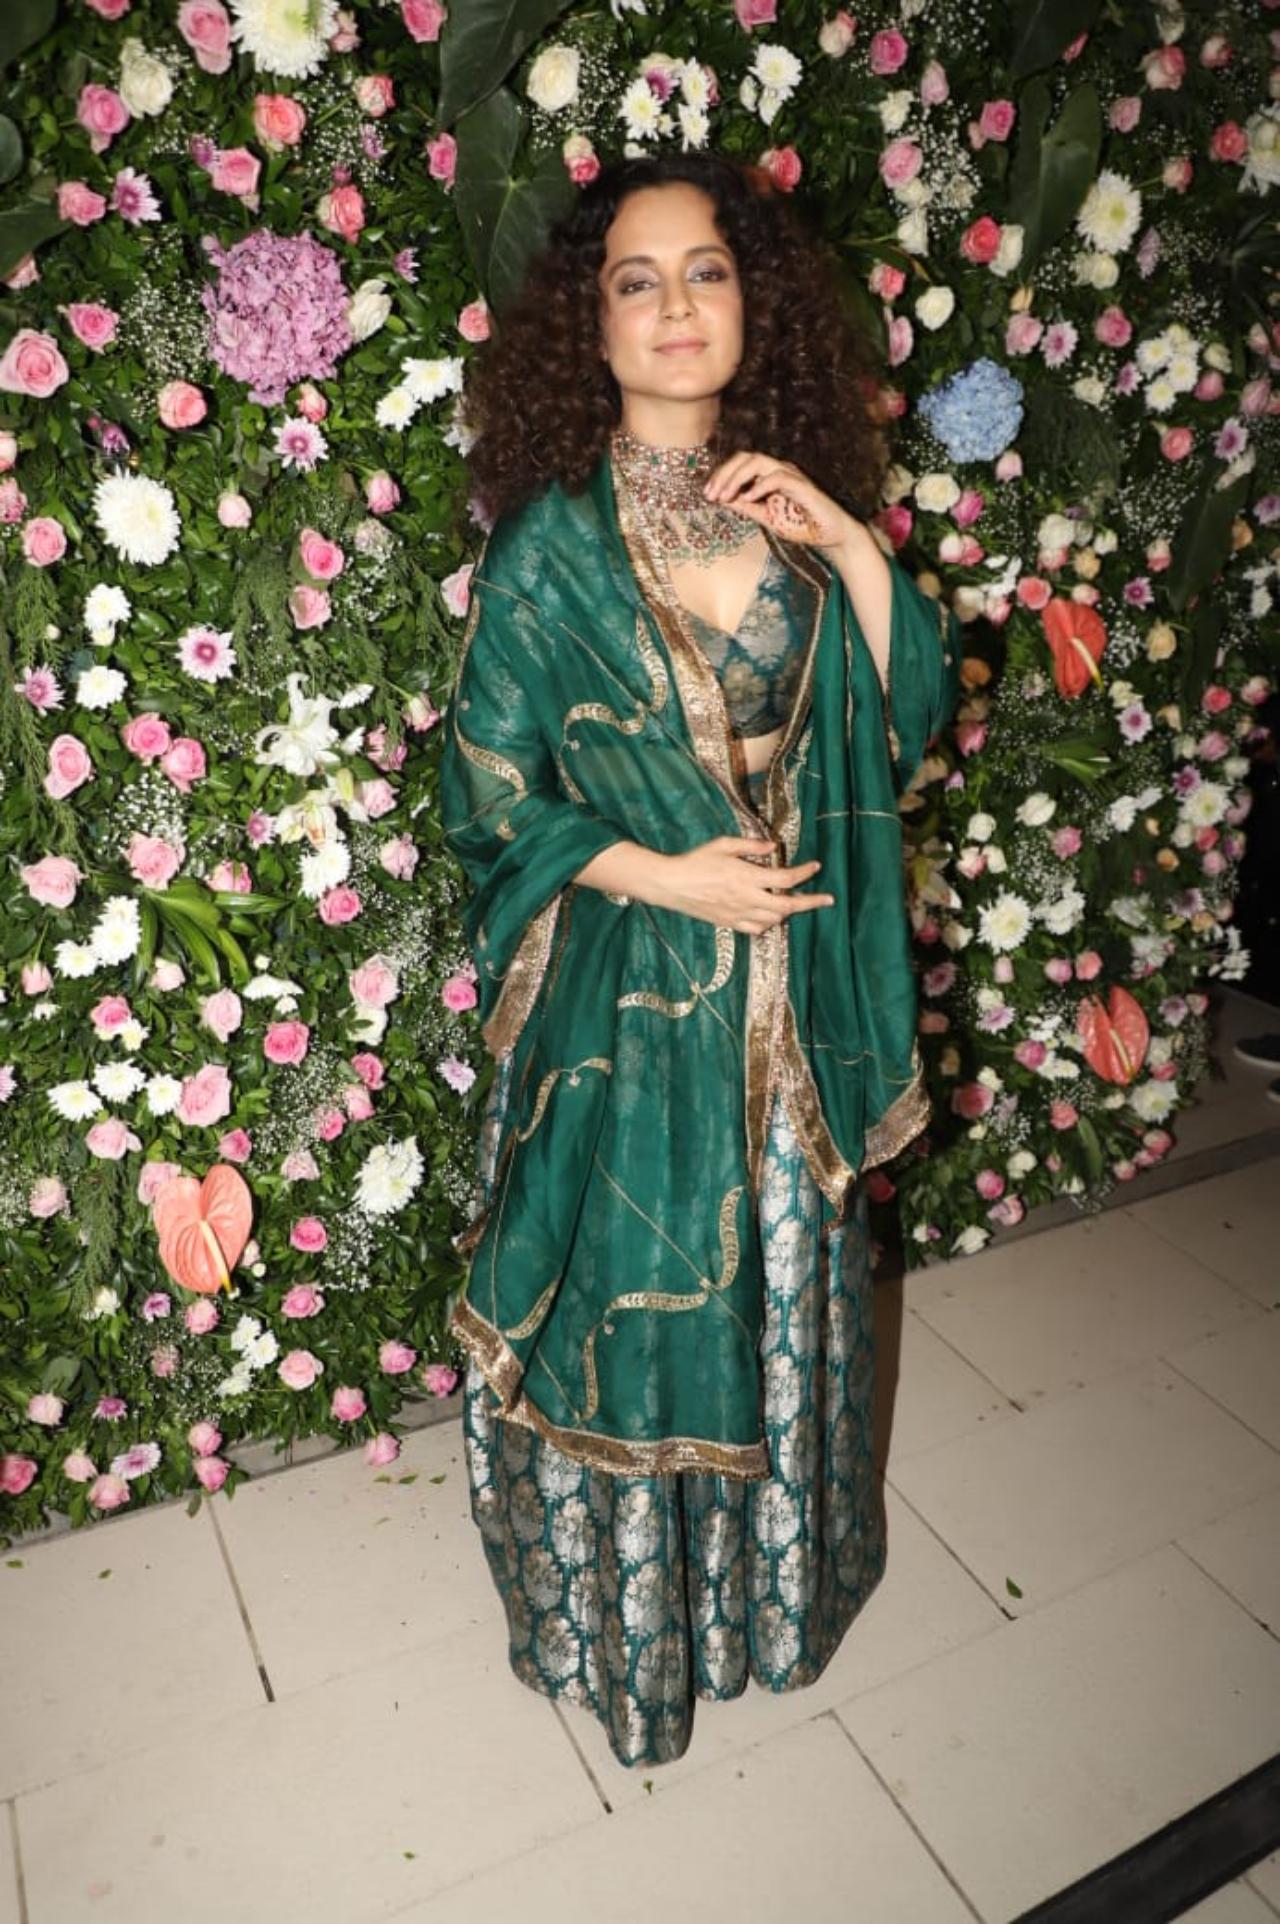 Kangana Ranaut, who shares a close bond with Ekta Kapoor was also seen at the party. The actress opted for an all-green traditional wear for the night